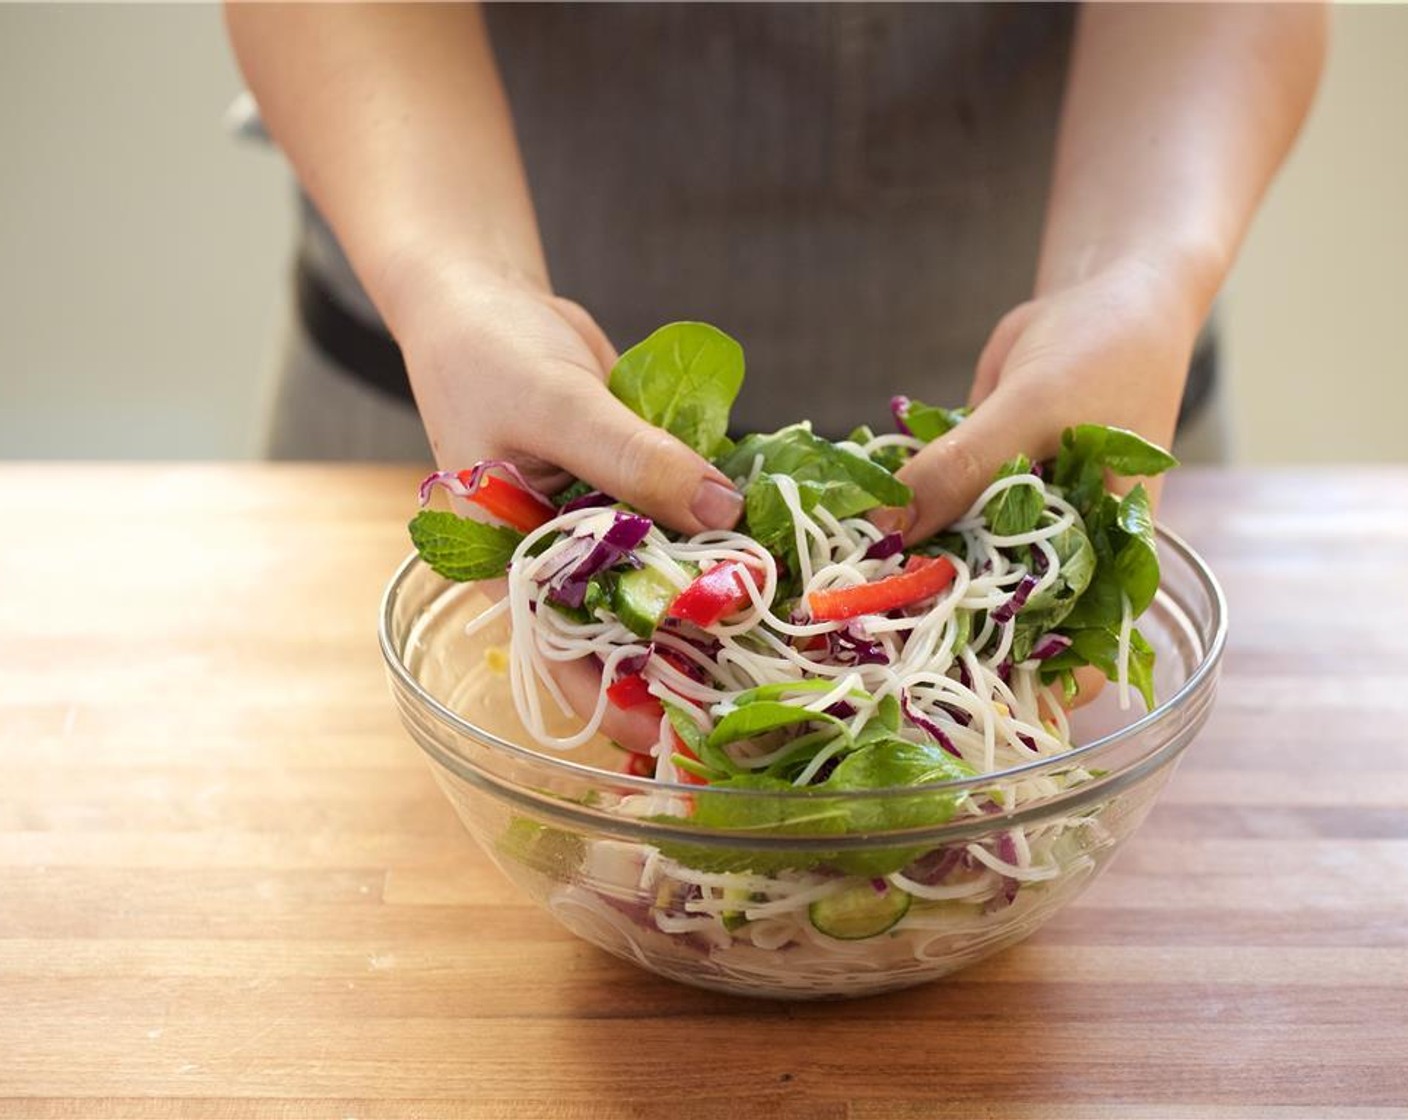 step 8 In the bowl with the noodles, add Arugula (2 3/4 cups), Red Cabbage (2/3 cup), Basil, Cilantro, Mint, Red Pepper, mini cucumber, and remaining dressing. Toss to combine.